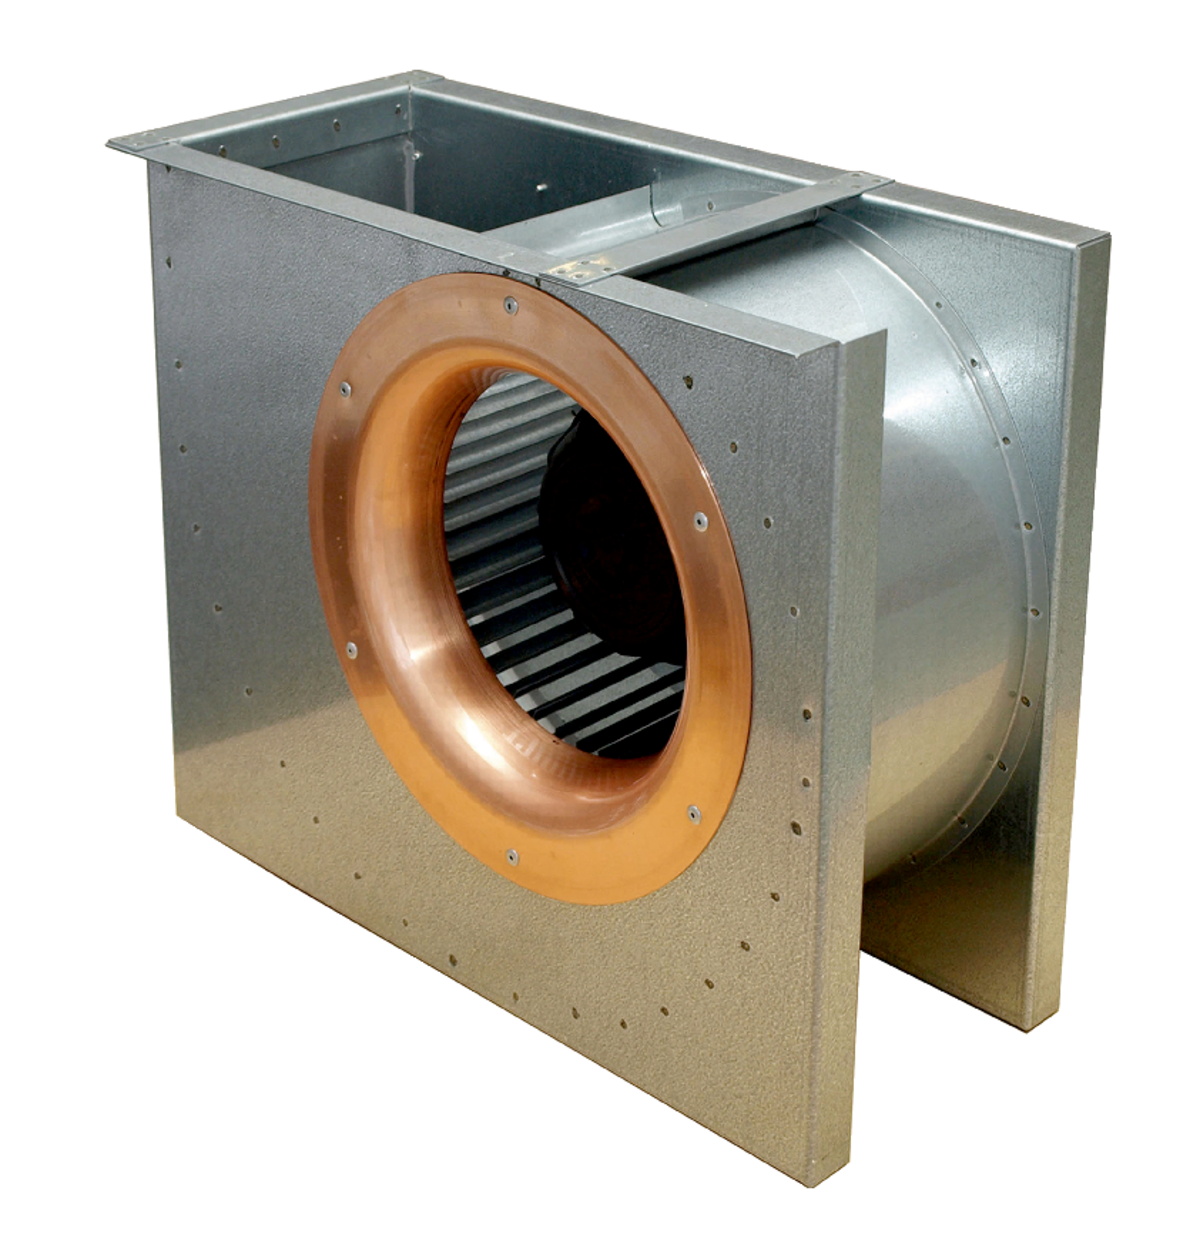 DKEX - Centrifugal Fans - Fans - Products - Systemair